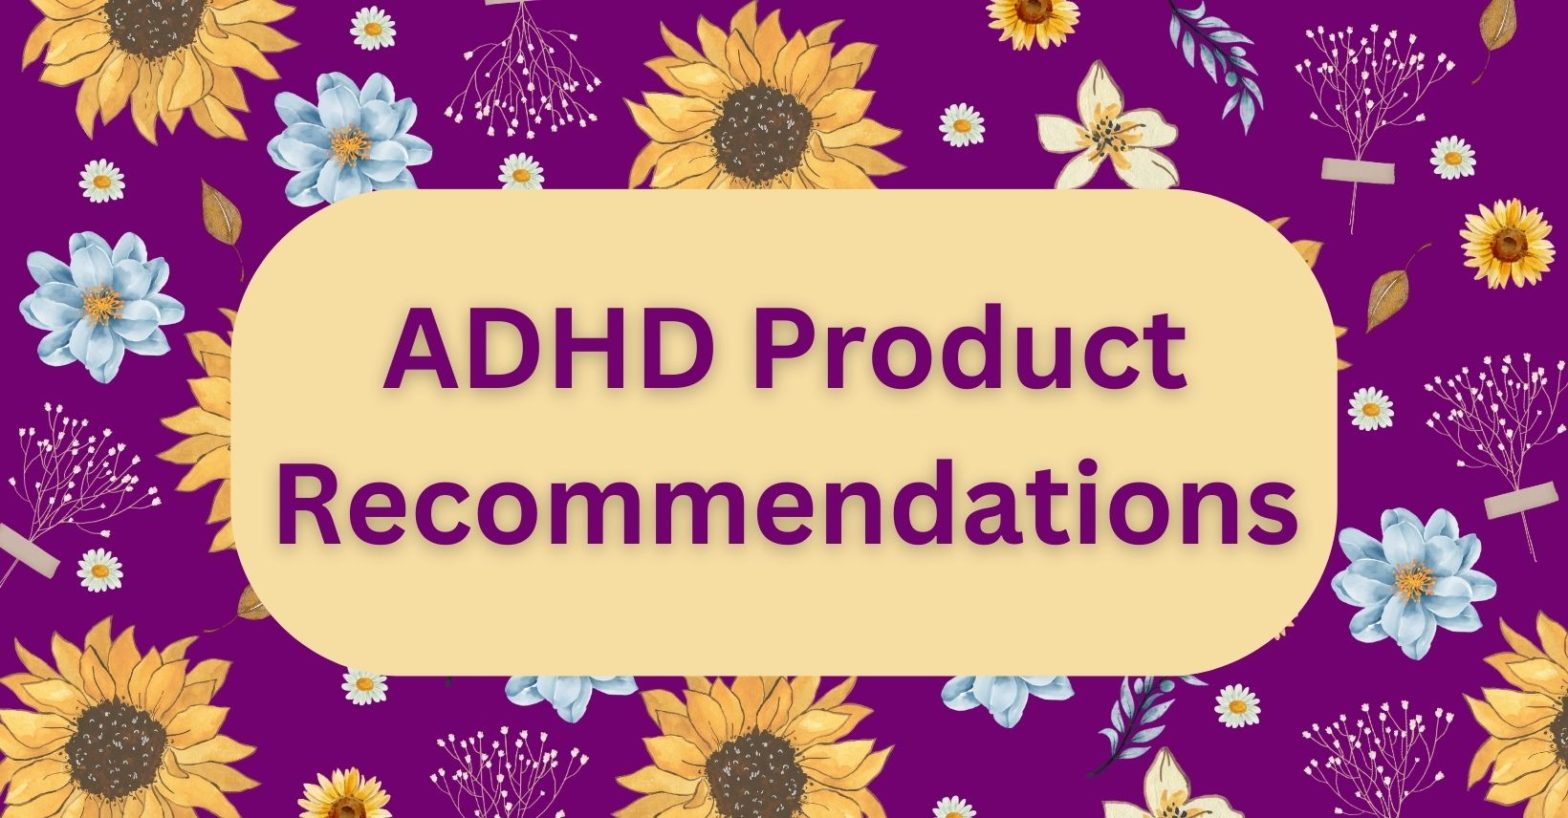 ADHD Product Recommendations